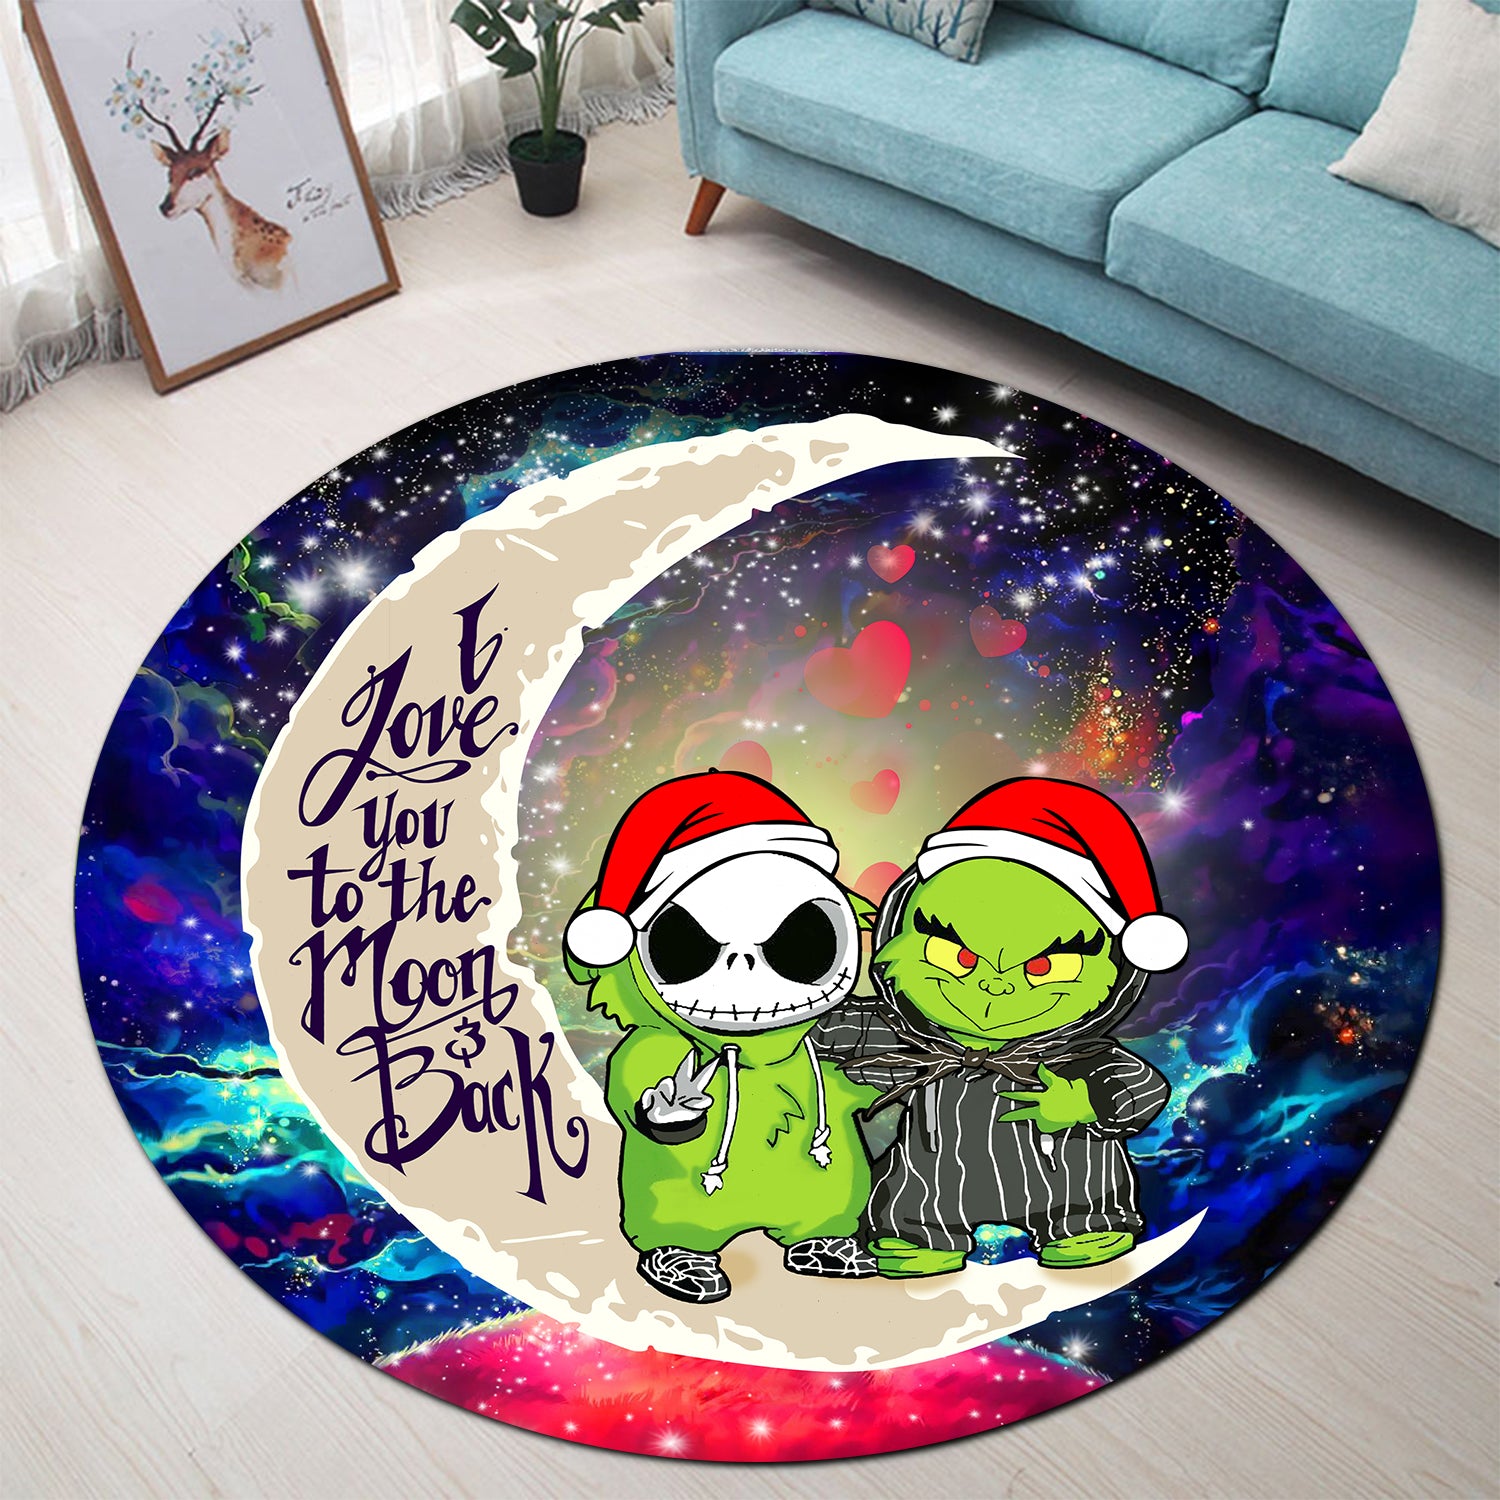 Grinch And Jack Nightmare Before Christmas Love You To The Moon Galaxy Round Carpet Rug Bedroom Livingroom Home Decor Nearkii